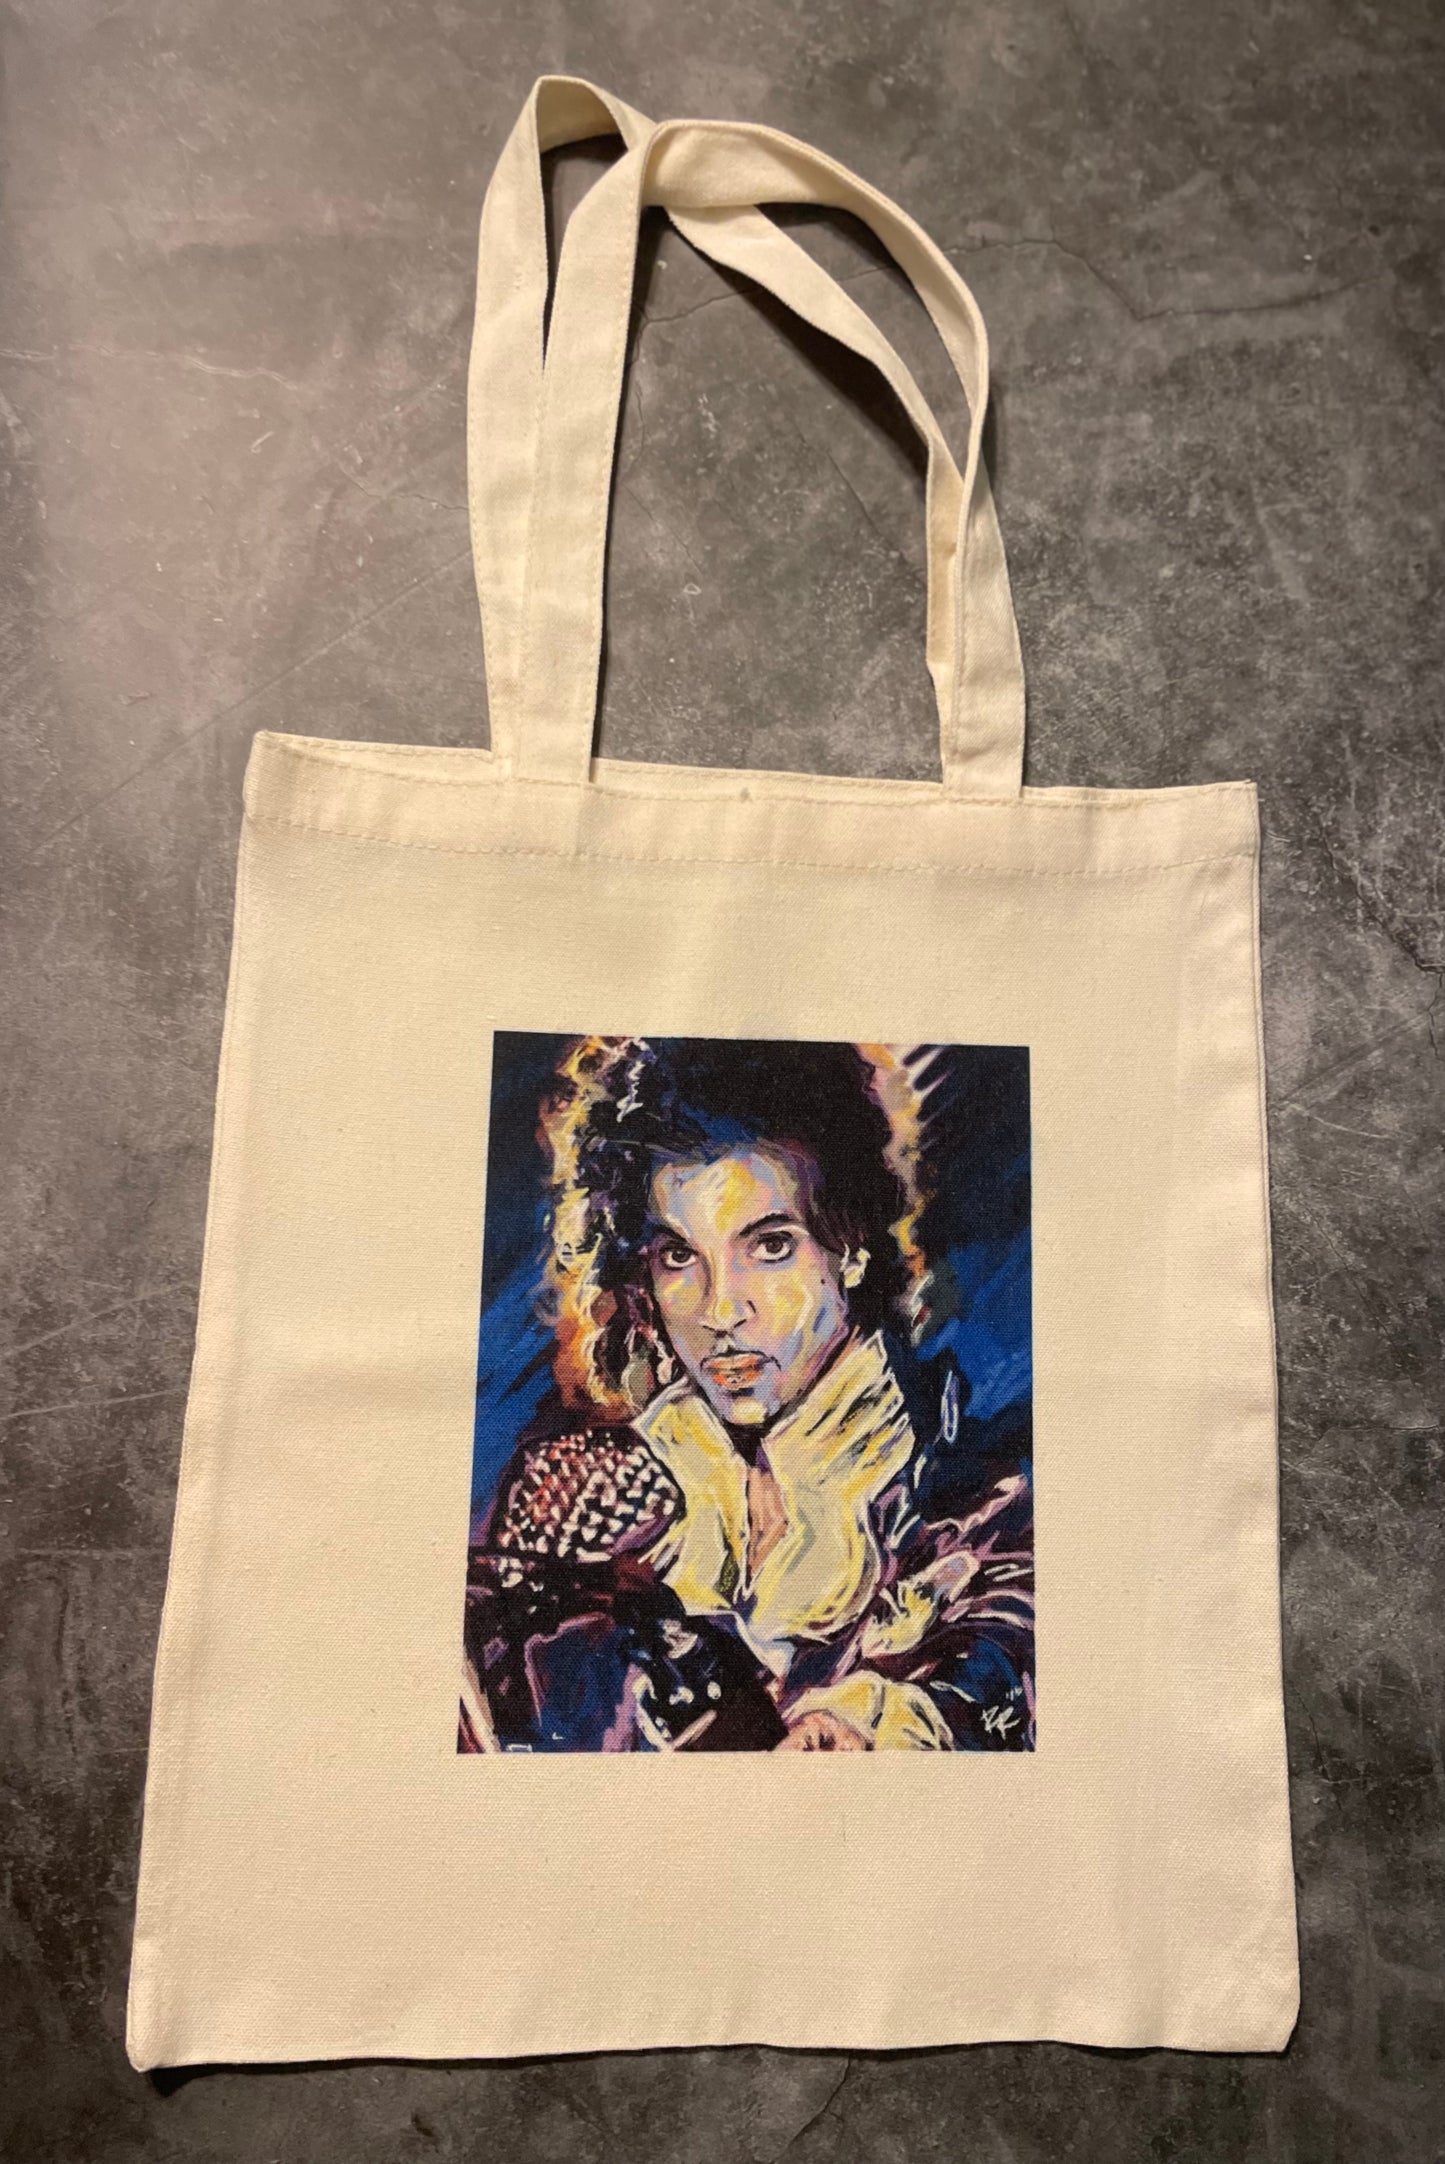 Customized Totes, Custom Made Bags,The Artist Formerly Known as Prince Canvas Tote, Prince Bag